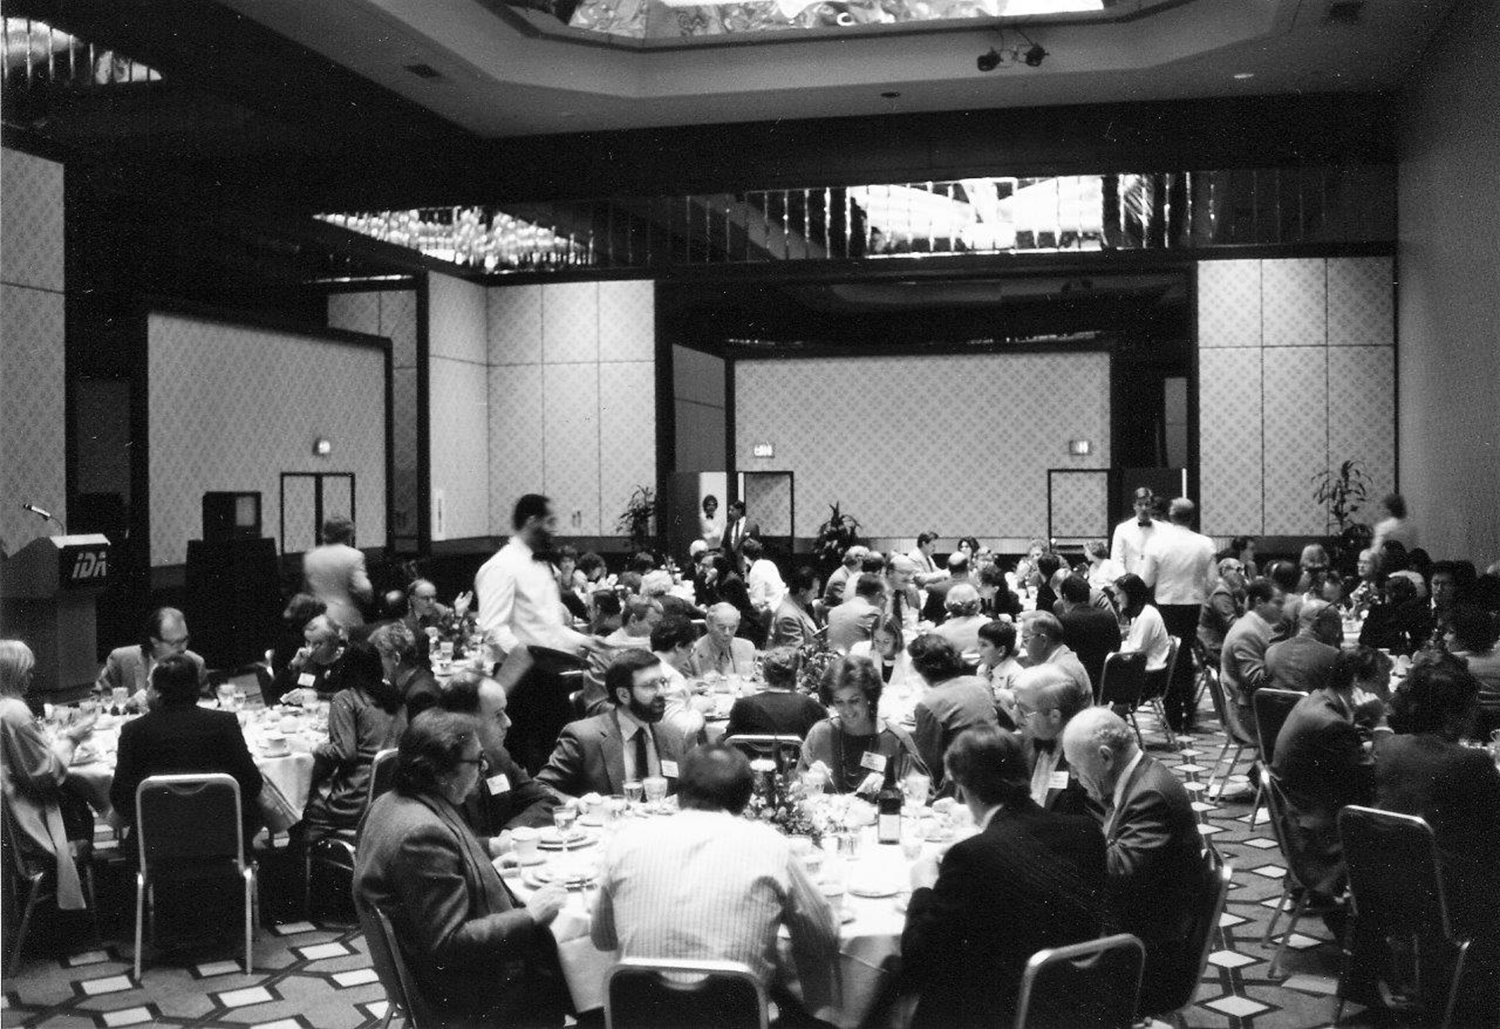 The inaugural IDA Documentary Awards luncheon at the Sheraton Premiere hotel in Universal City, Calif., in November 1985